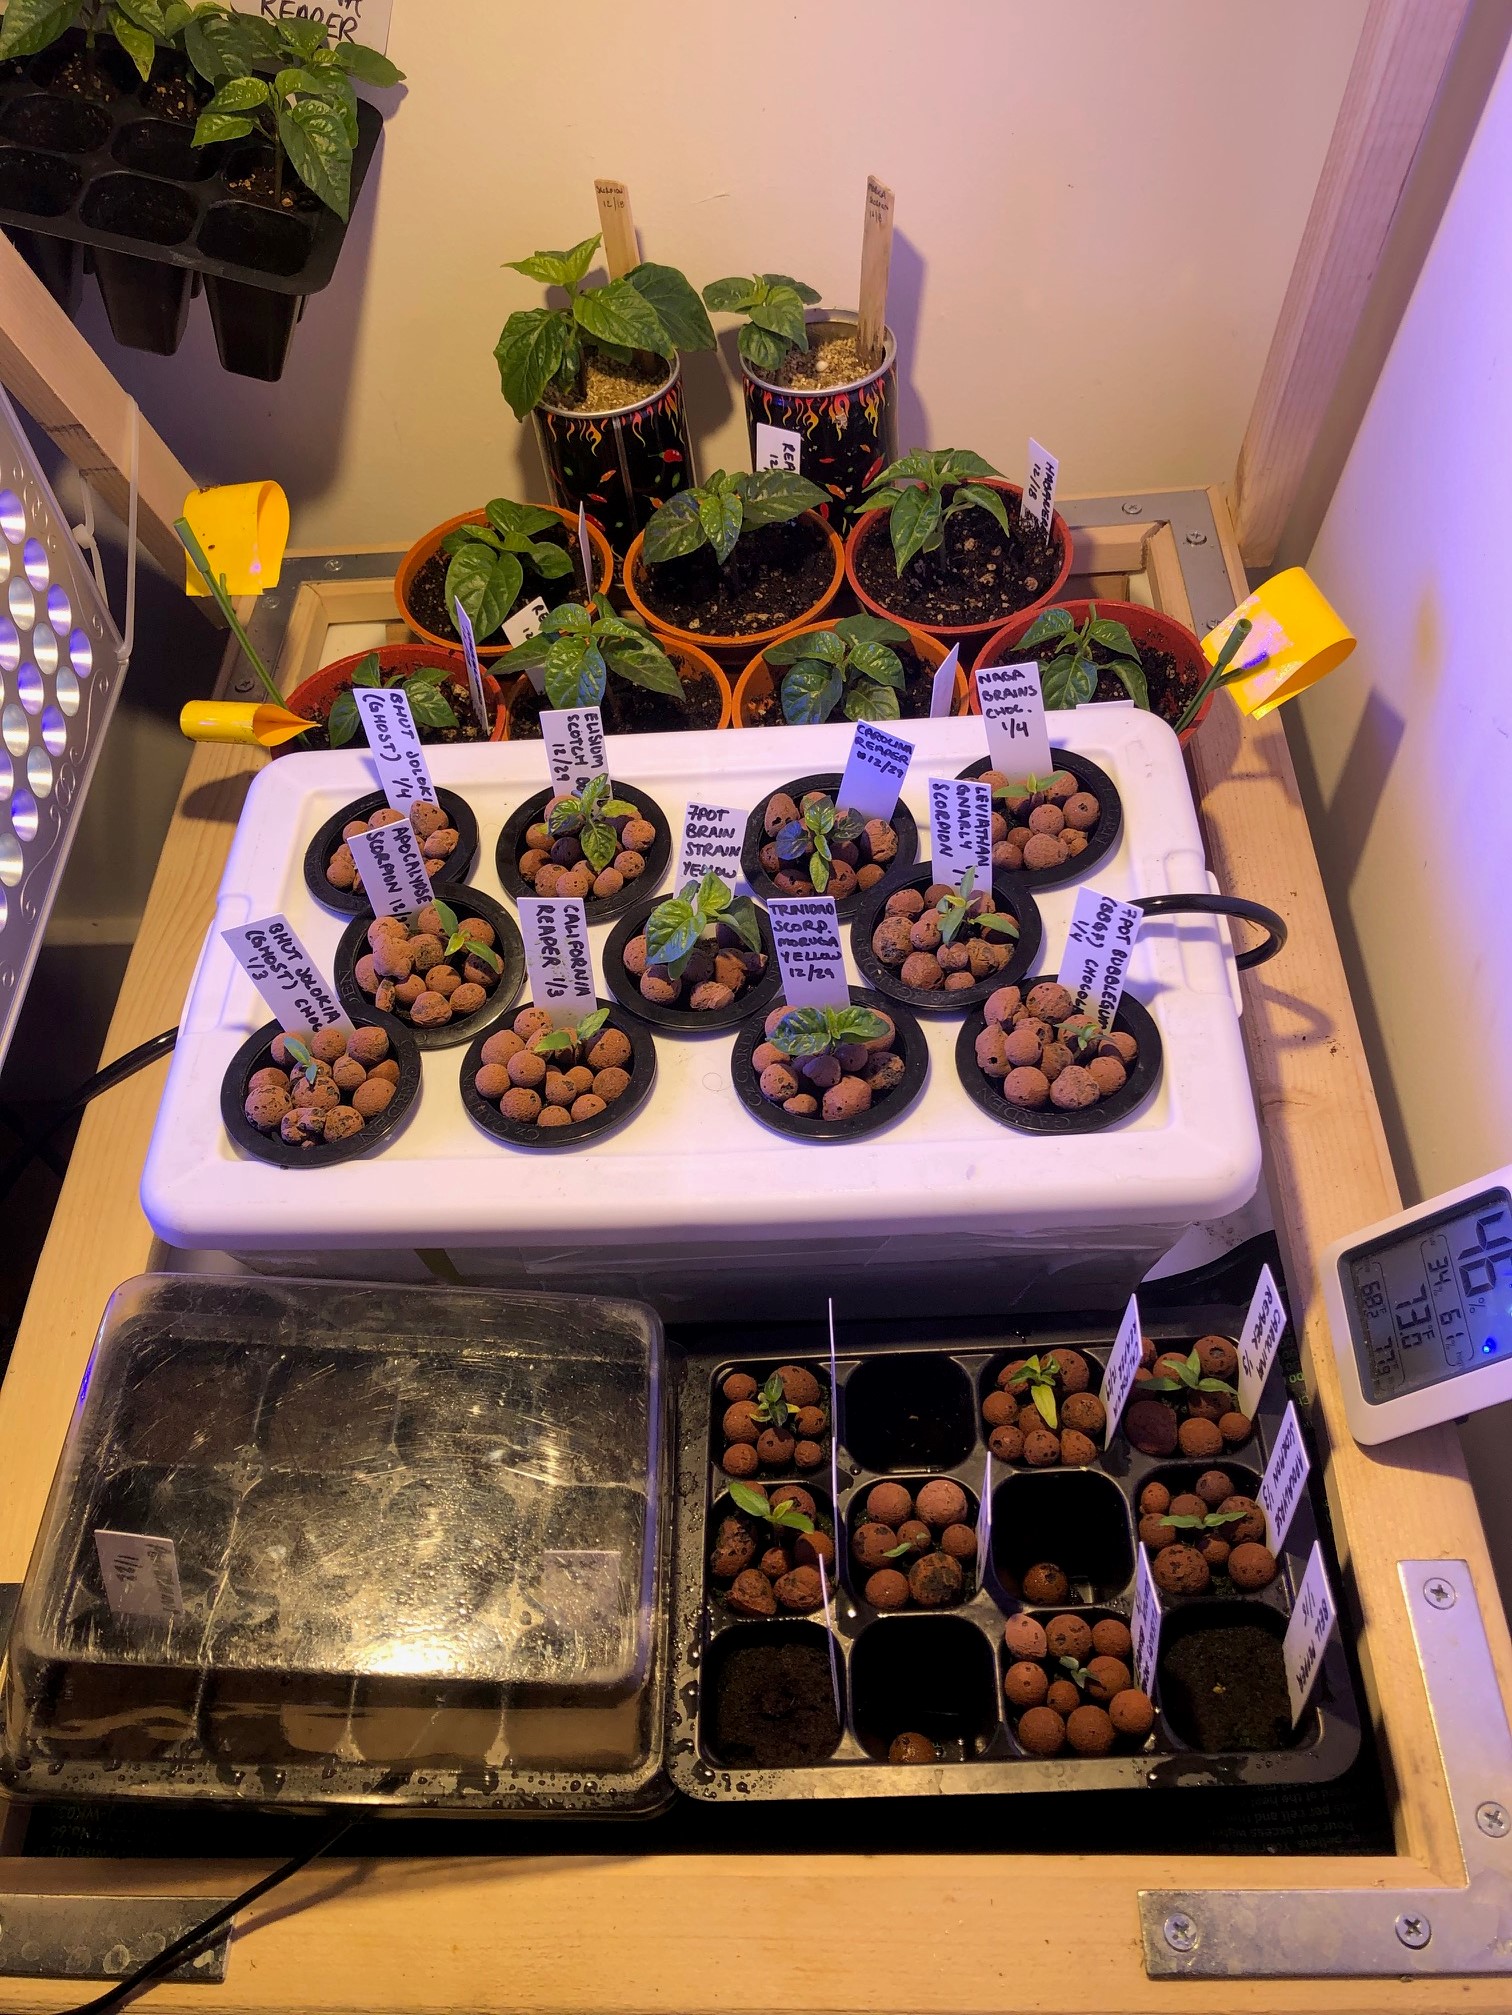 Chili Pepper Seedlings in DWC Hydroponic System